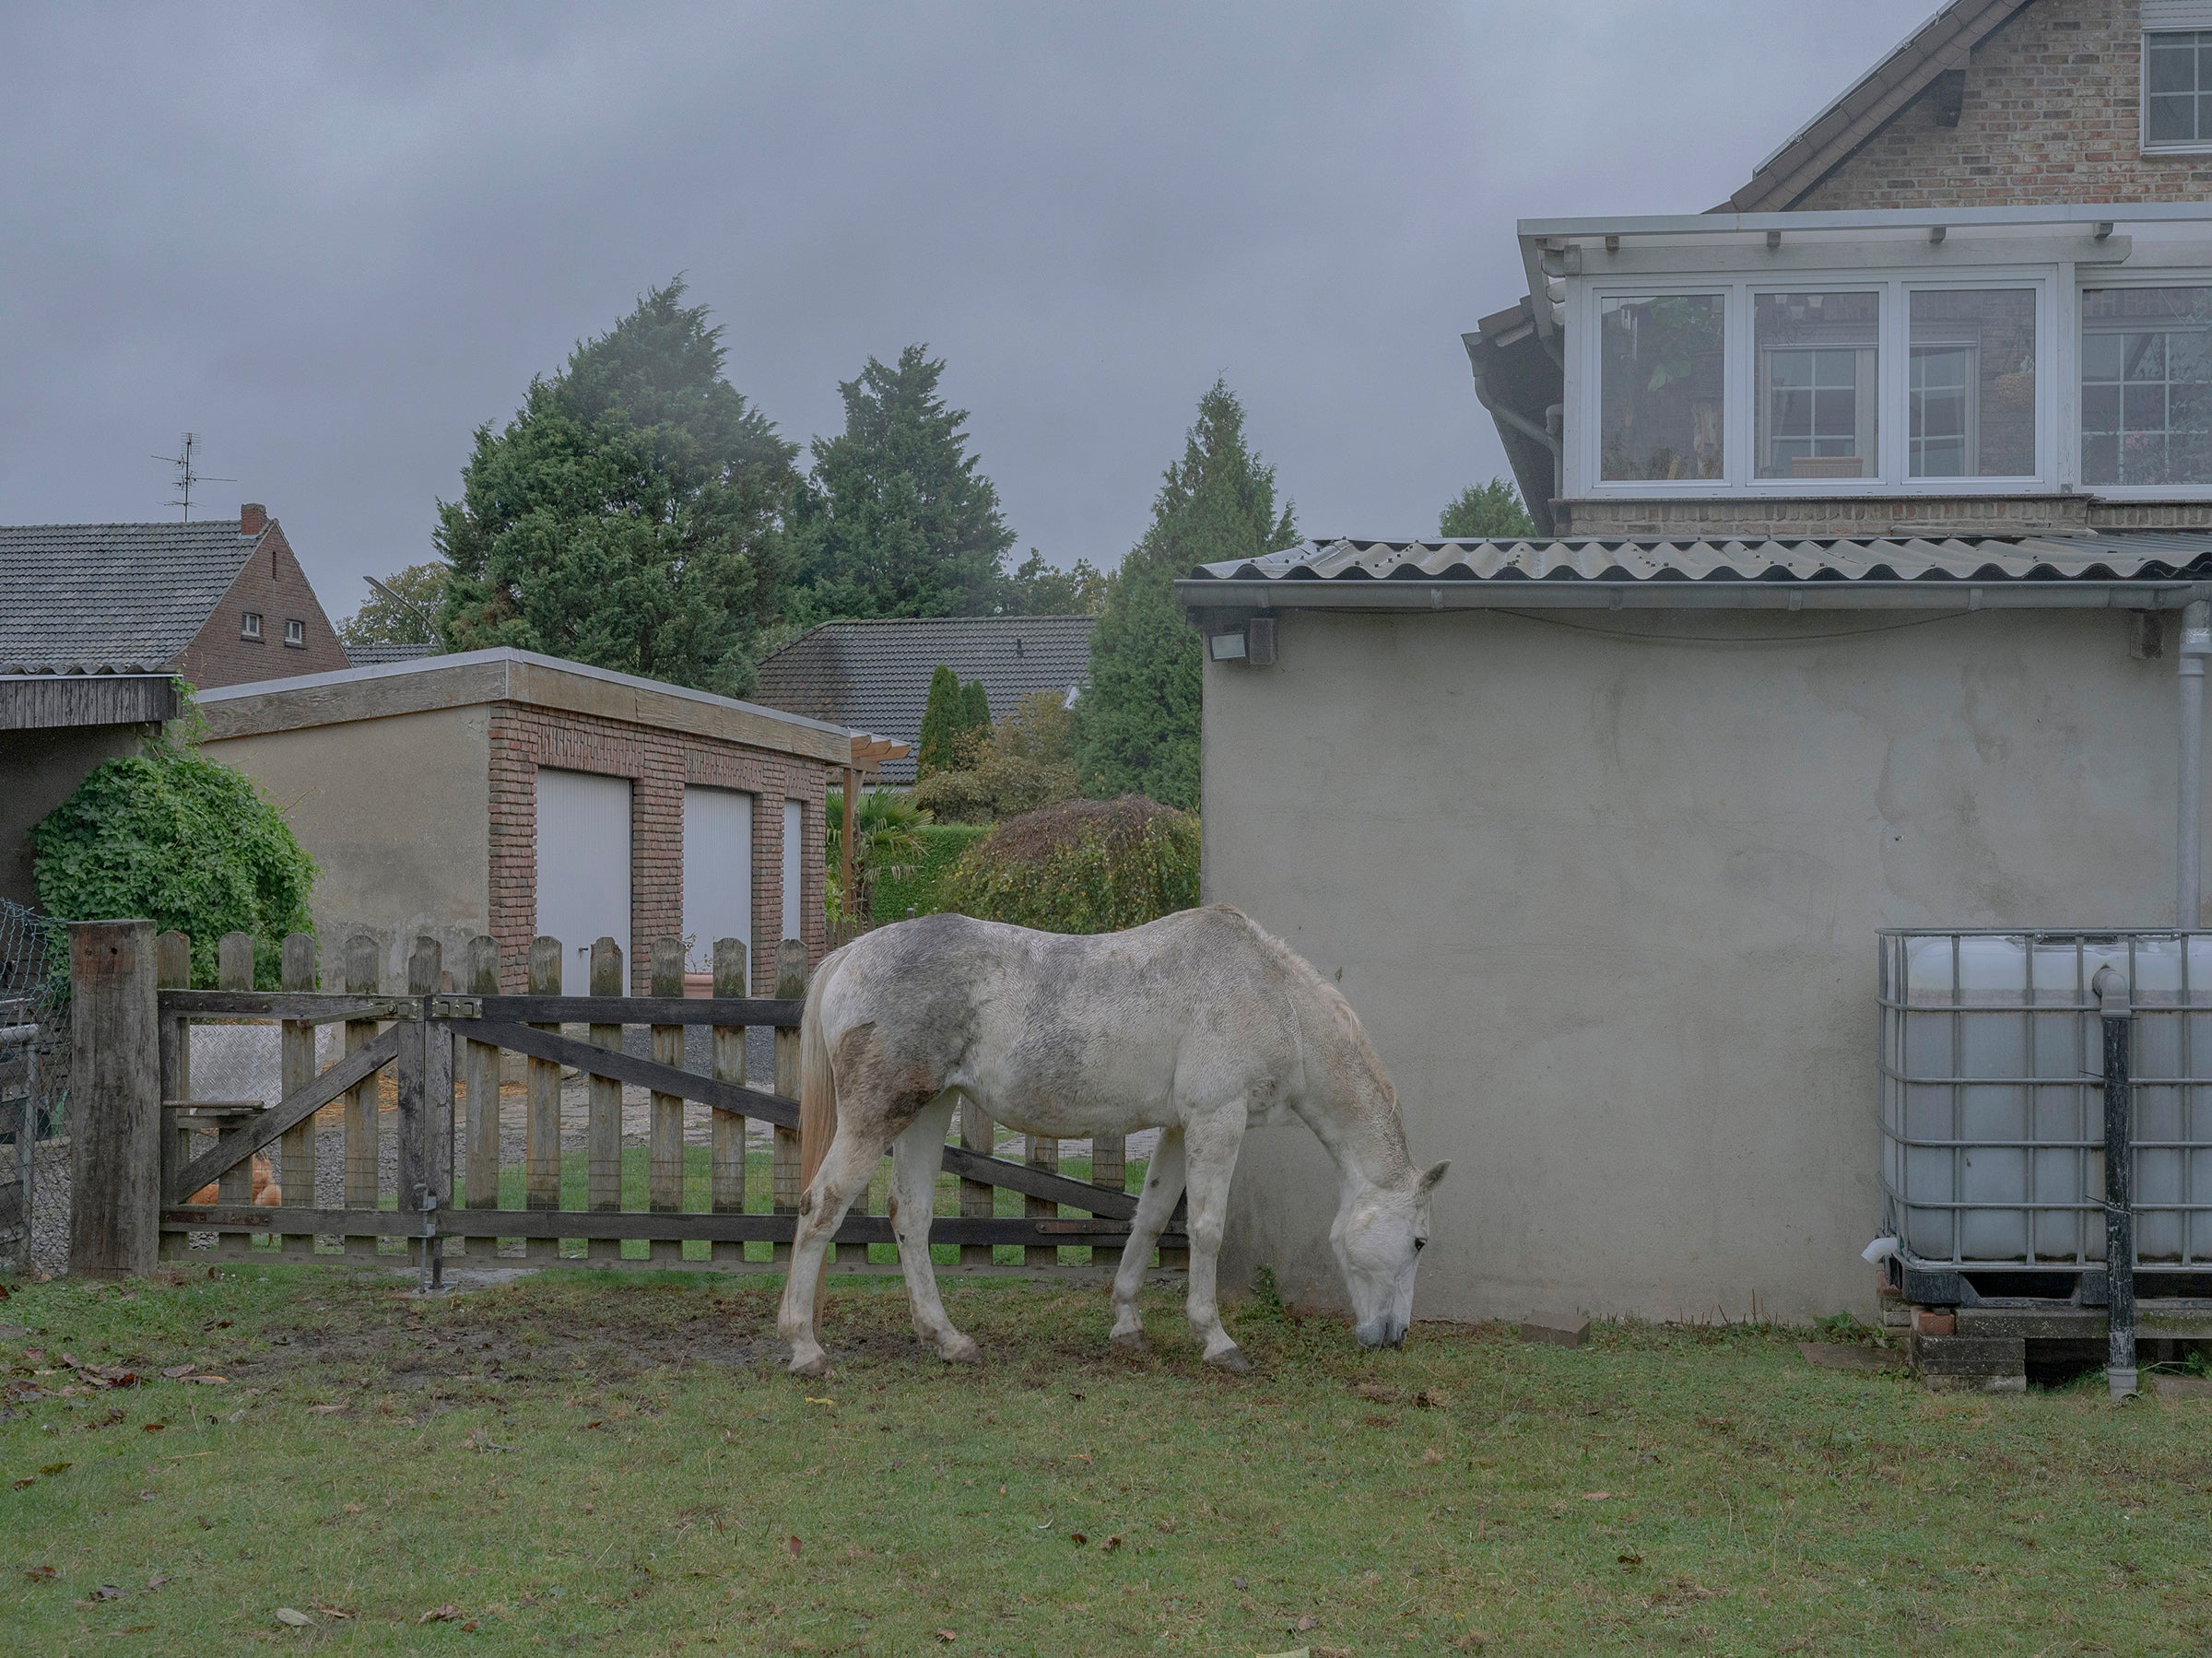 A horse belonging to the Dresen family grazes on their three-acre property in the village of Kuckum which they hope to keep